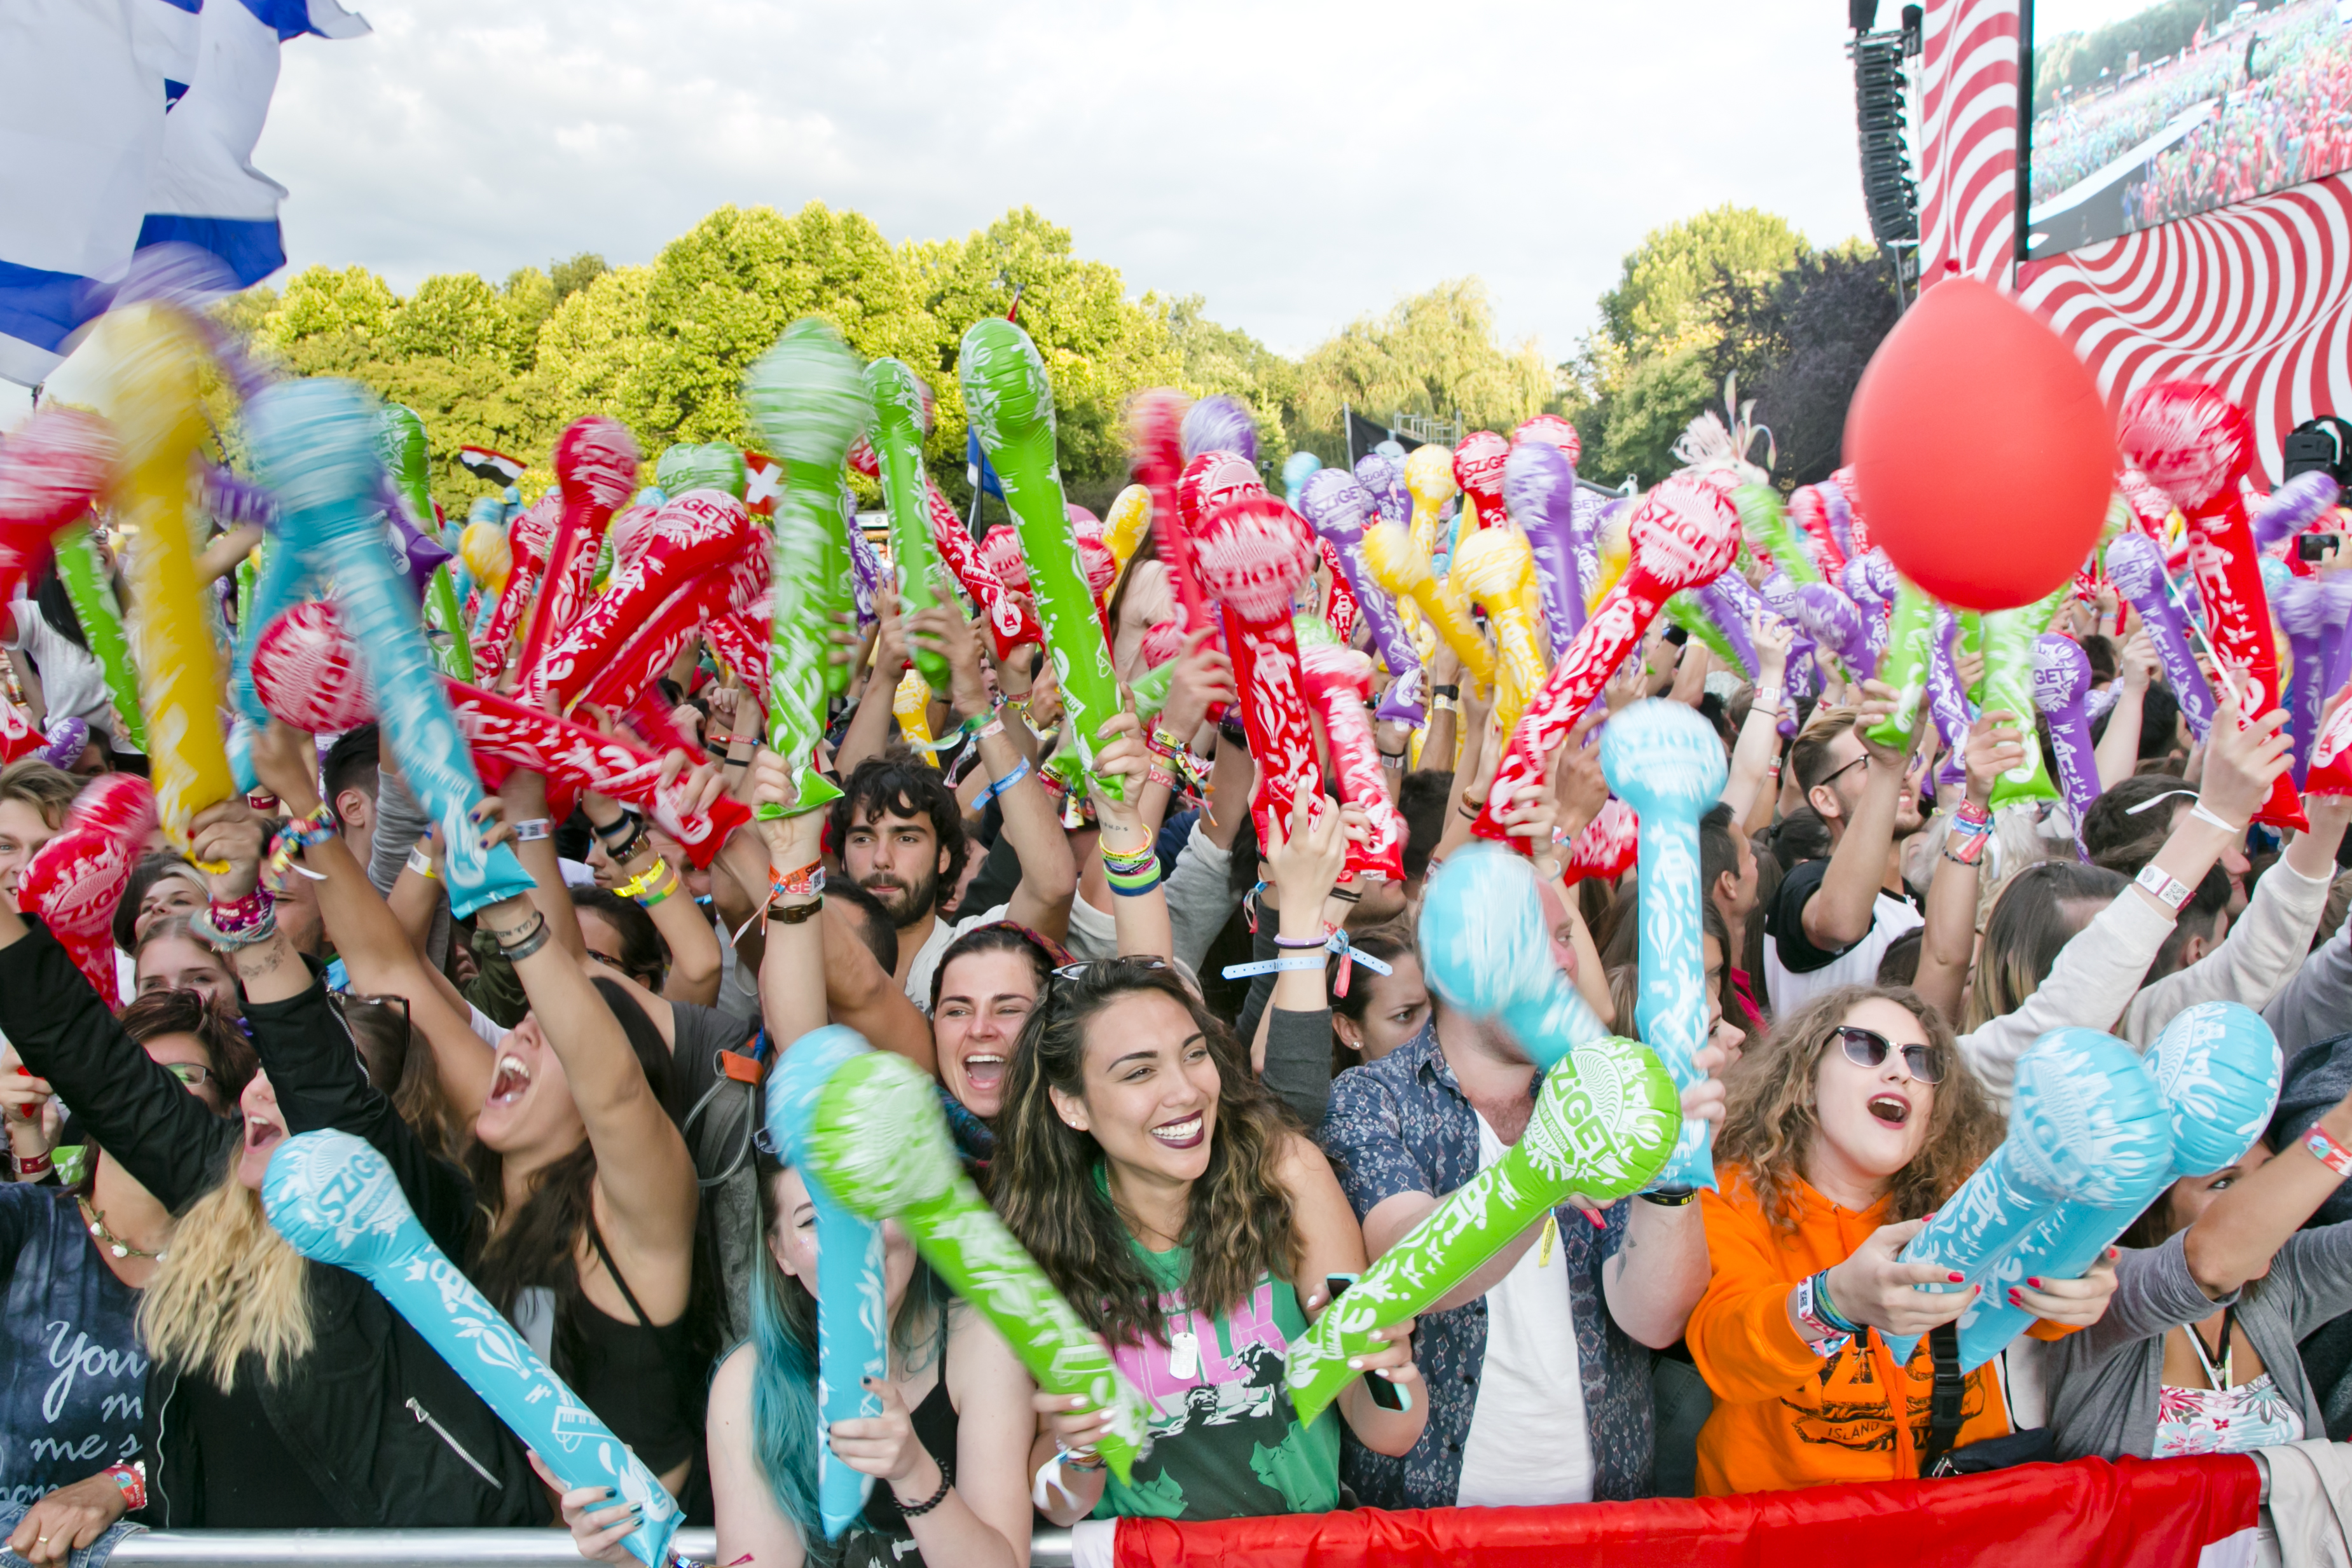 Crowd & Atmosphere at Sziget Festival, Budapest, Hungary - 11 August 2016